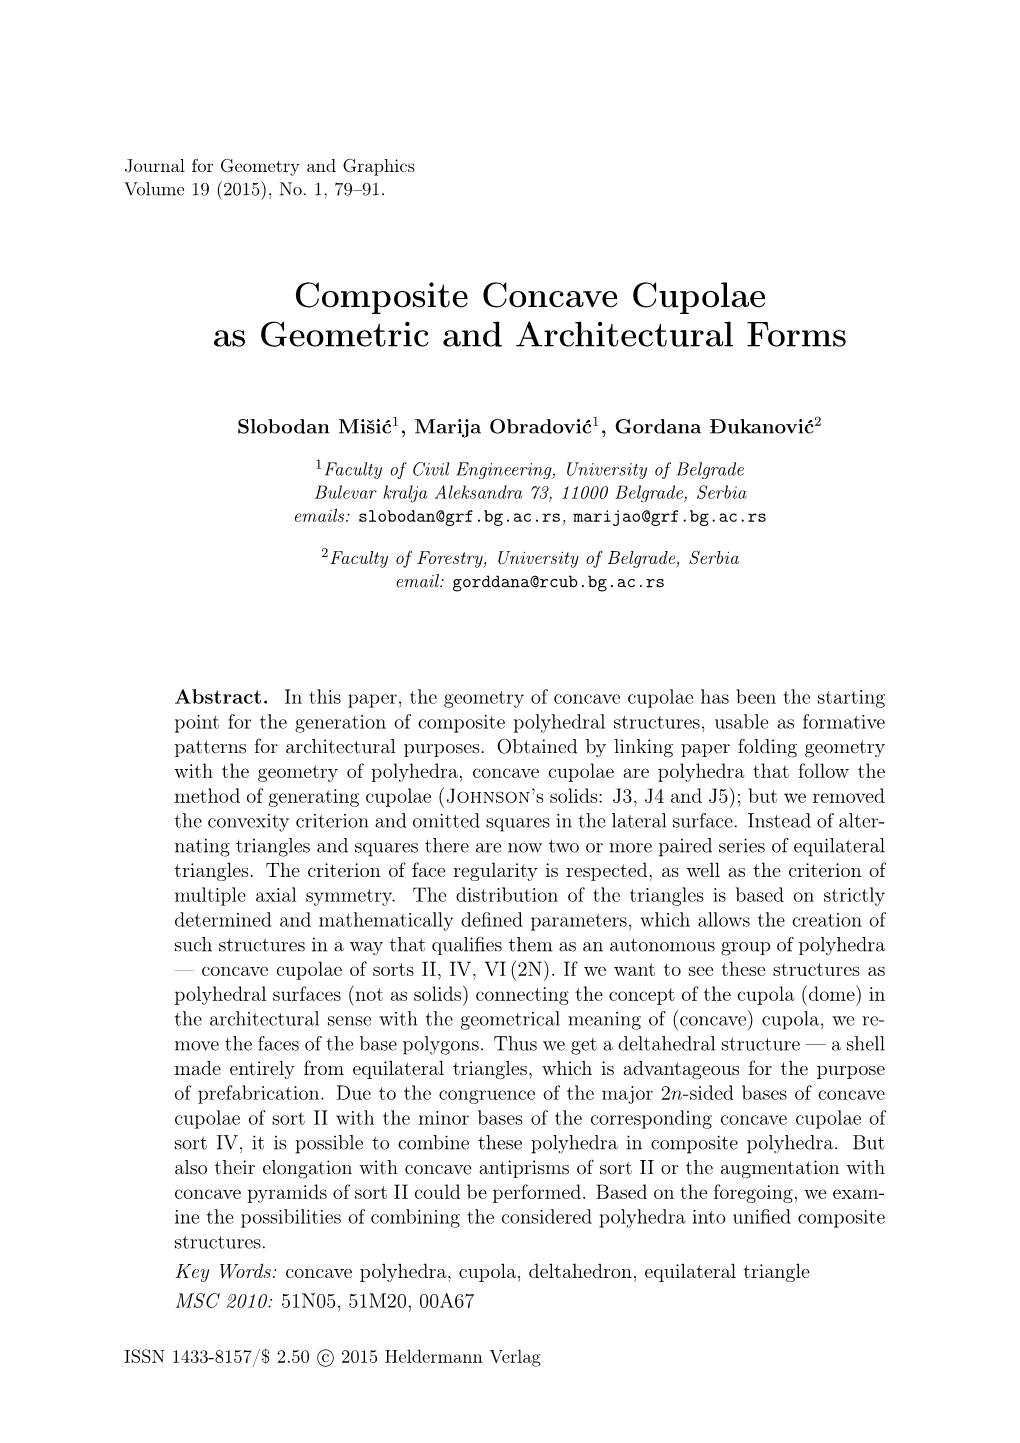 Composite Concave Cupolae As Geometric and Architectural Forms